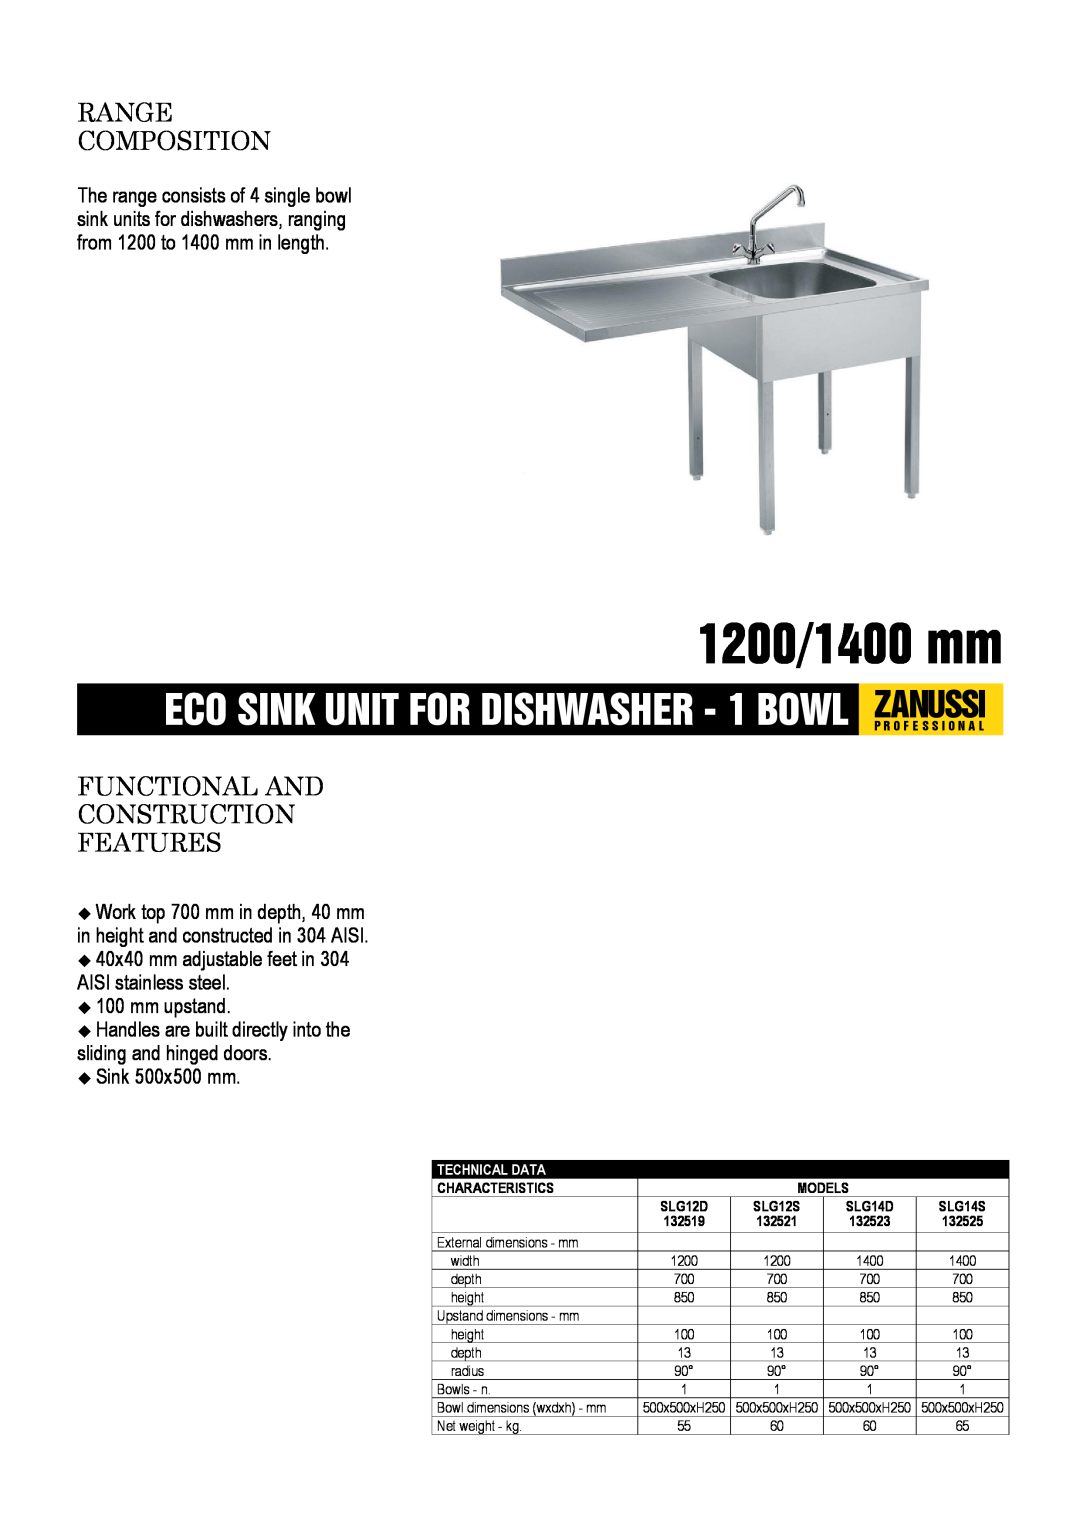 Zanussi SLG14D, SLG12D, SLG14S dimensions 1200/1400 mm, Range Composition, Functional And Construction Features, mm upstand 